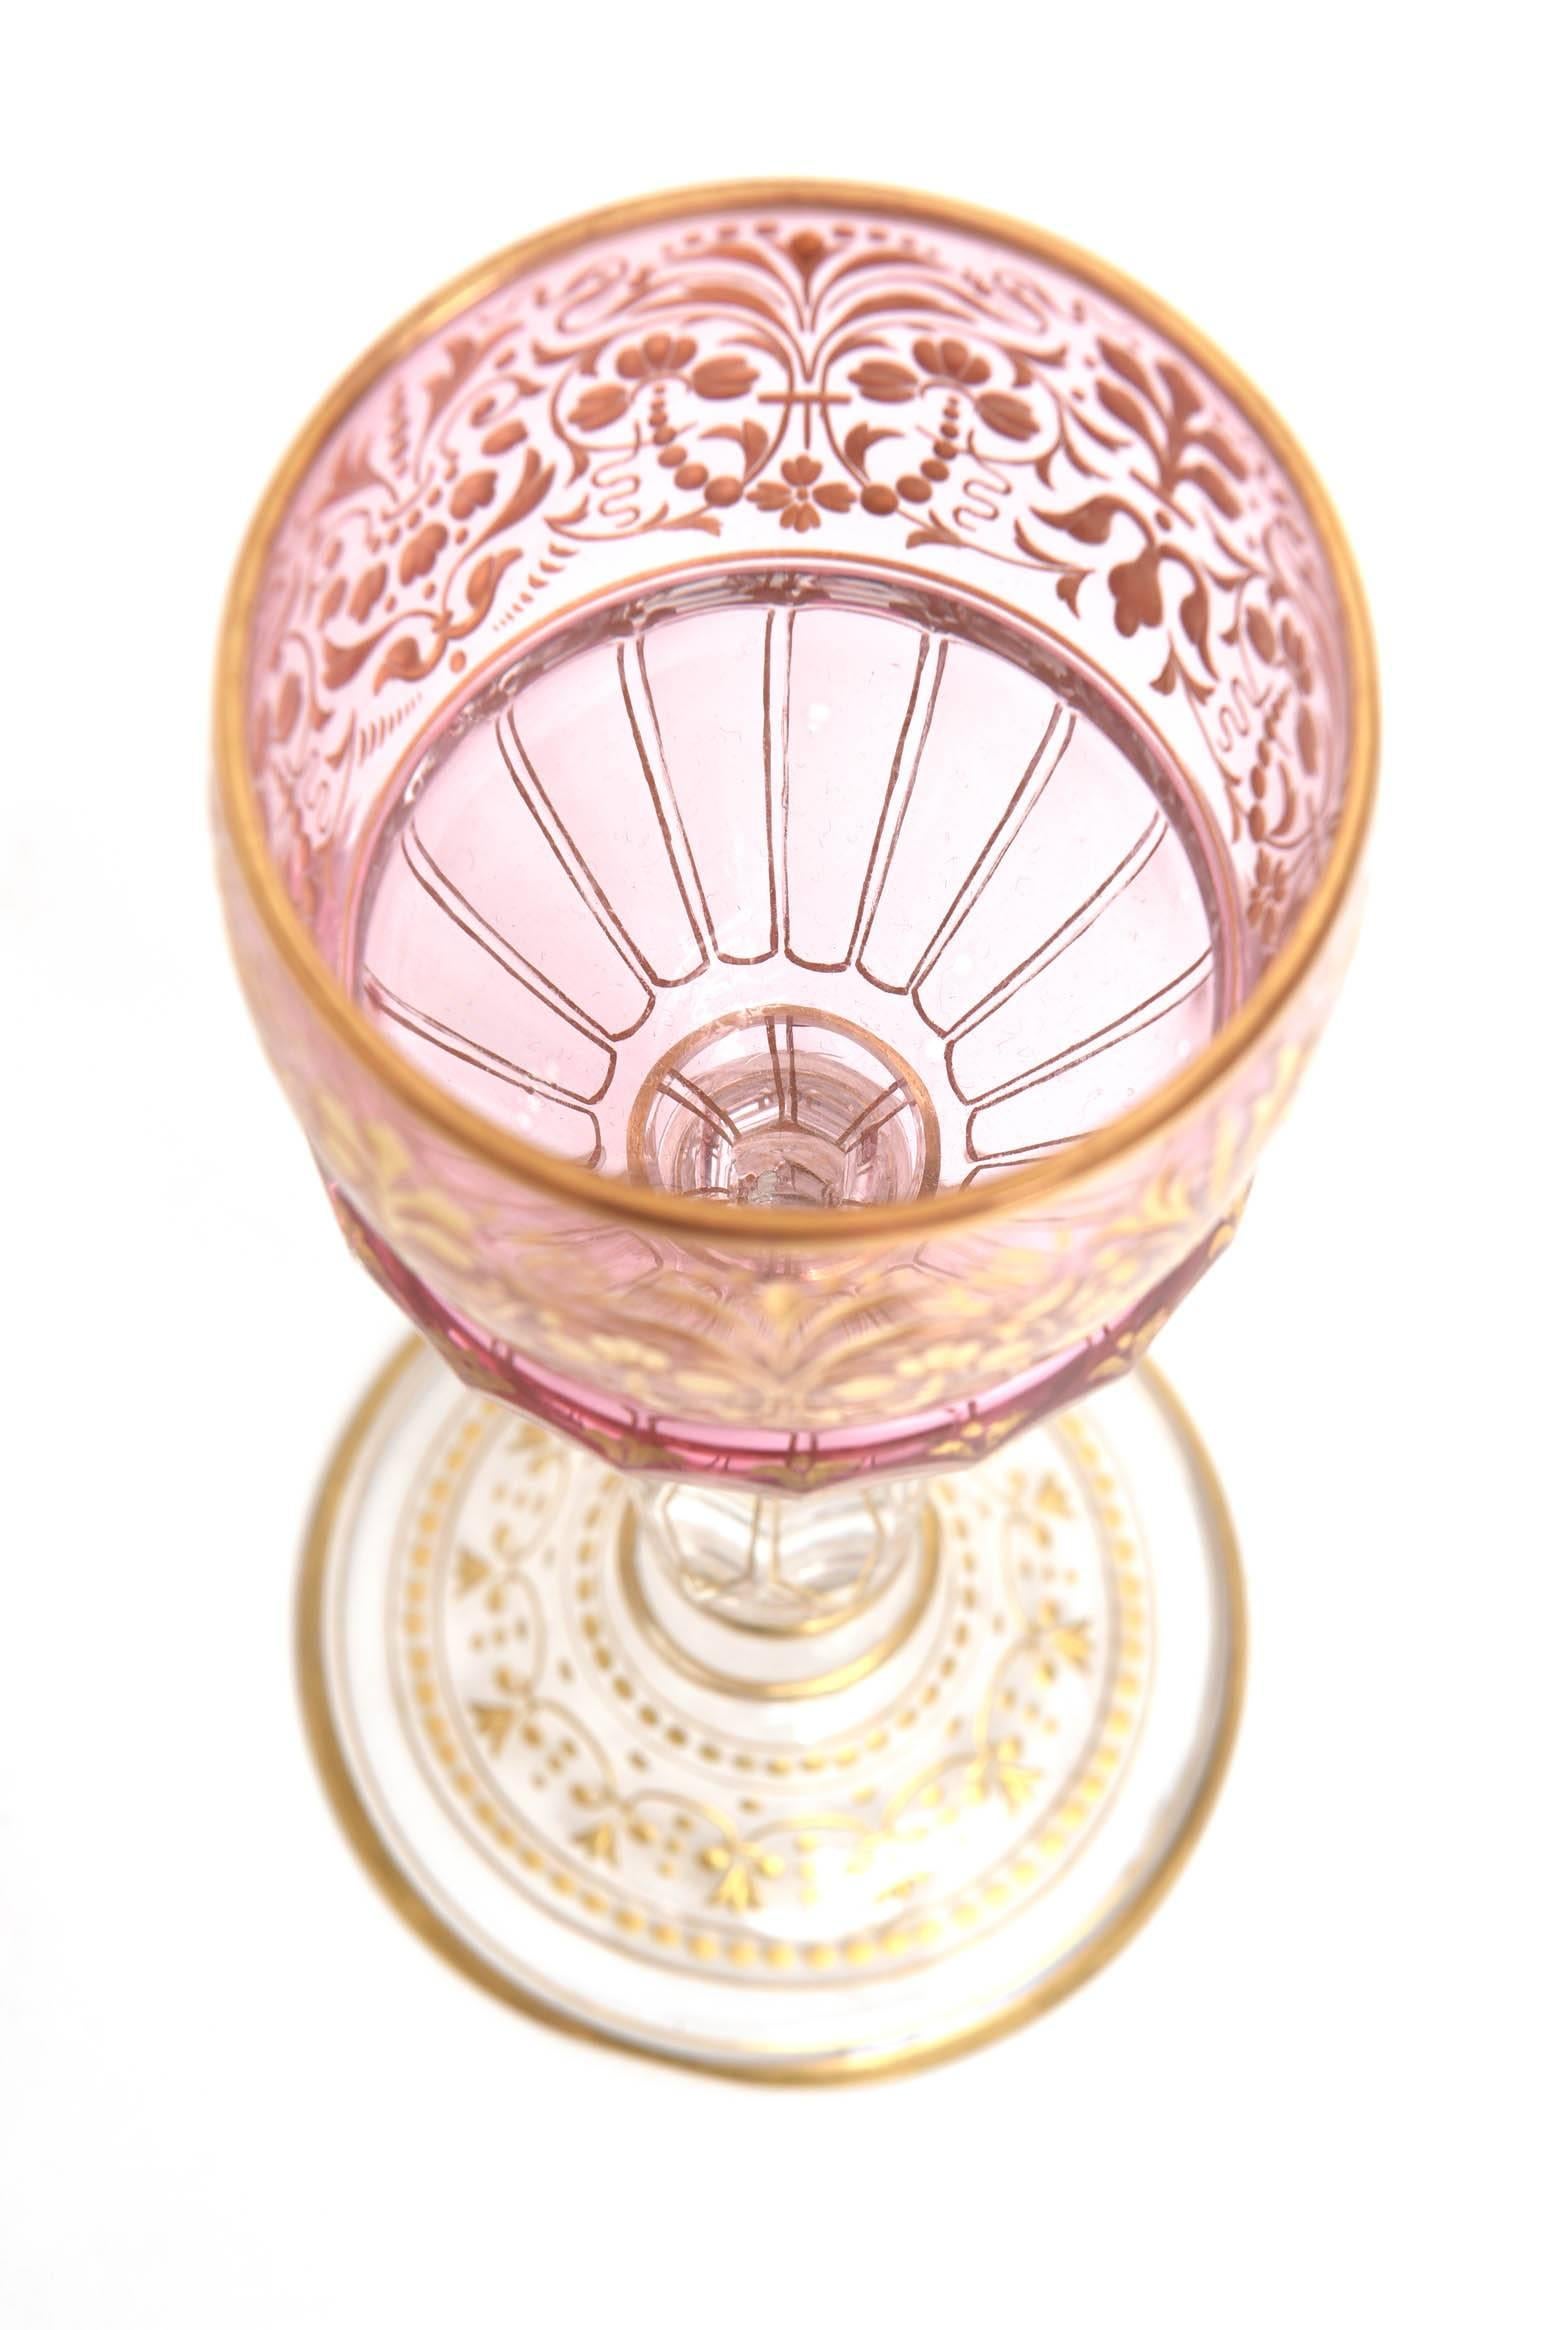 8 Elaborate Gilt and Ruby Pink Wine Goblets with Beautiful Stem 3